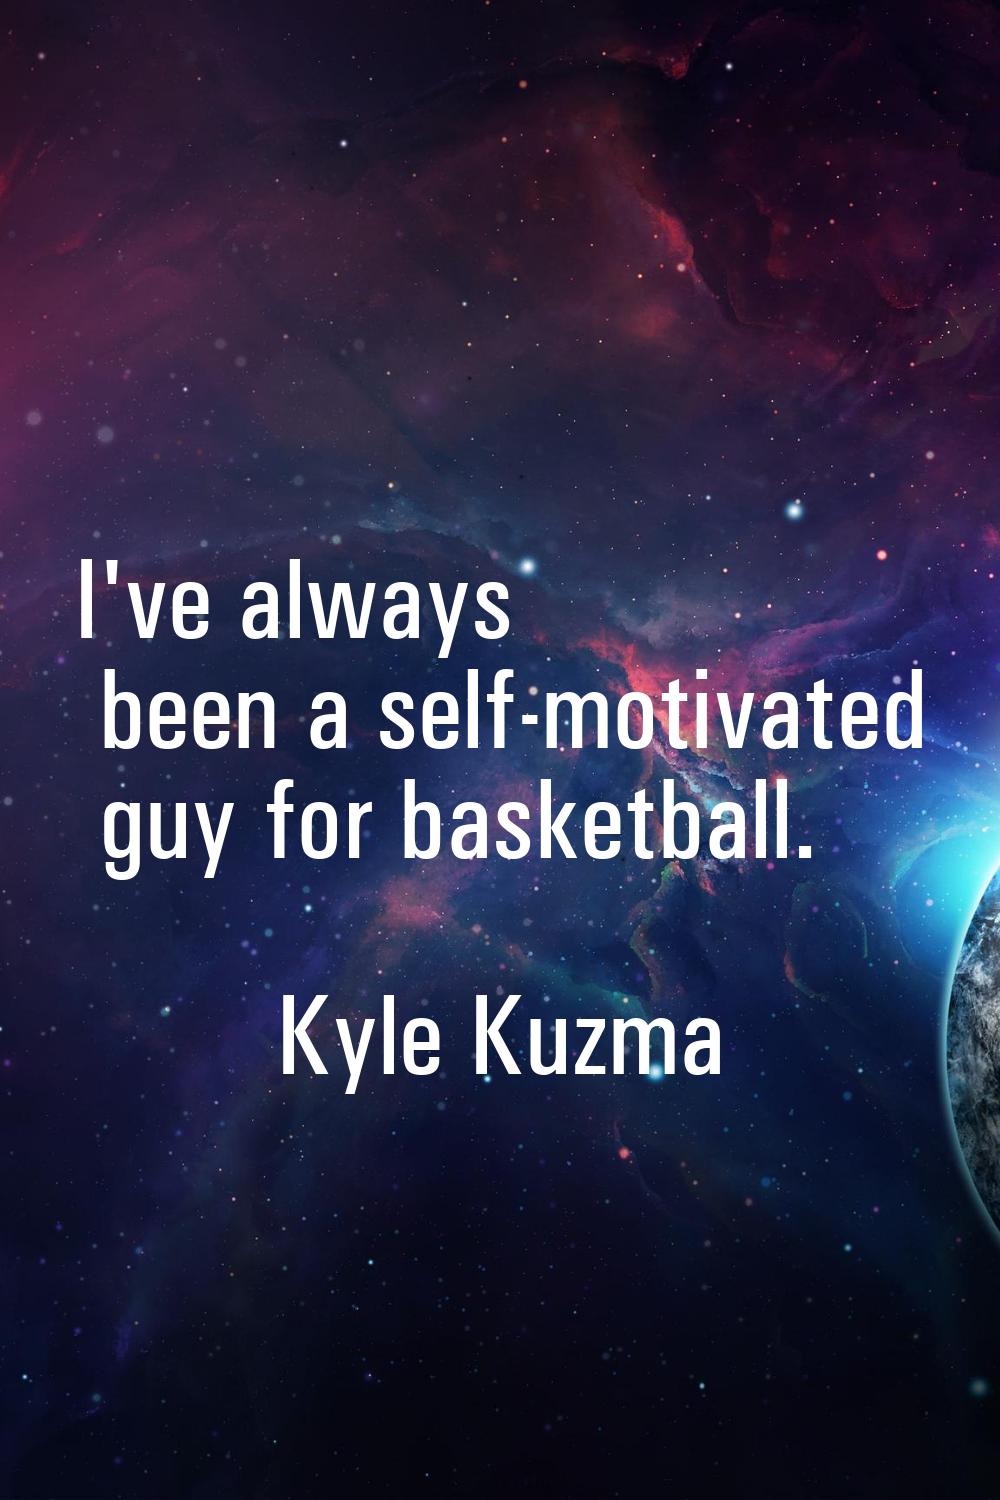 I've always been a self-motivated guy for basketball.